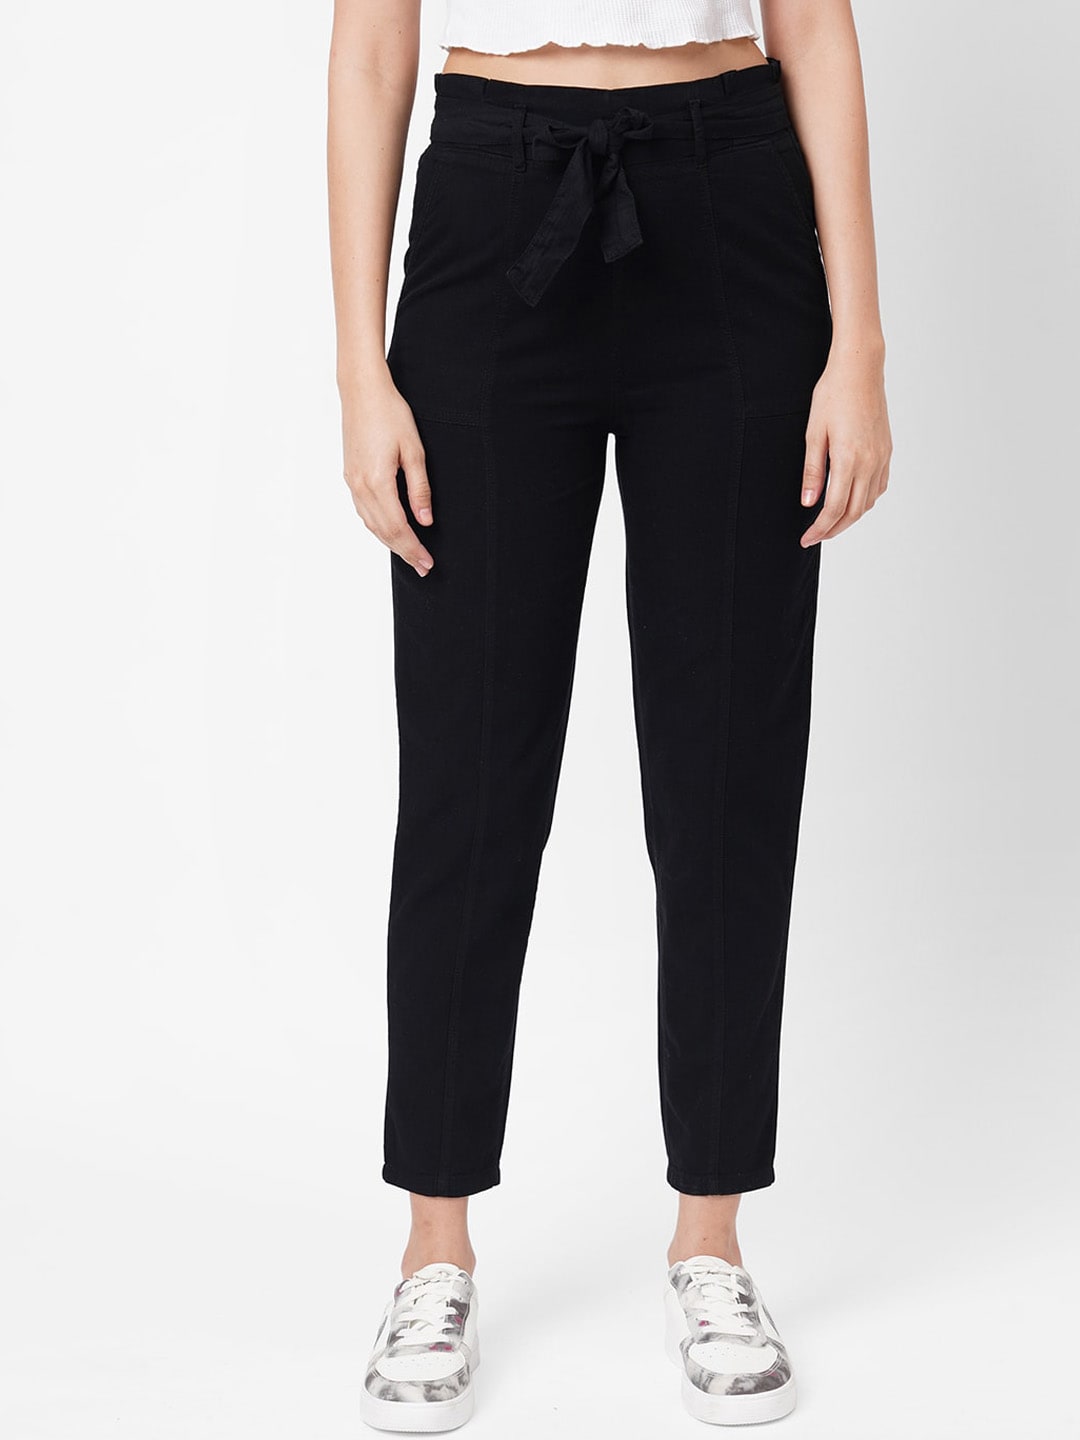 Kraus Jeans Women Slim Fit High-Rise Trousers Price in India